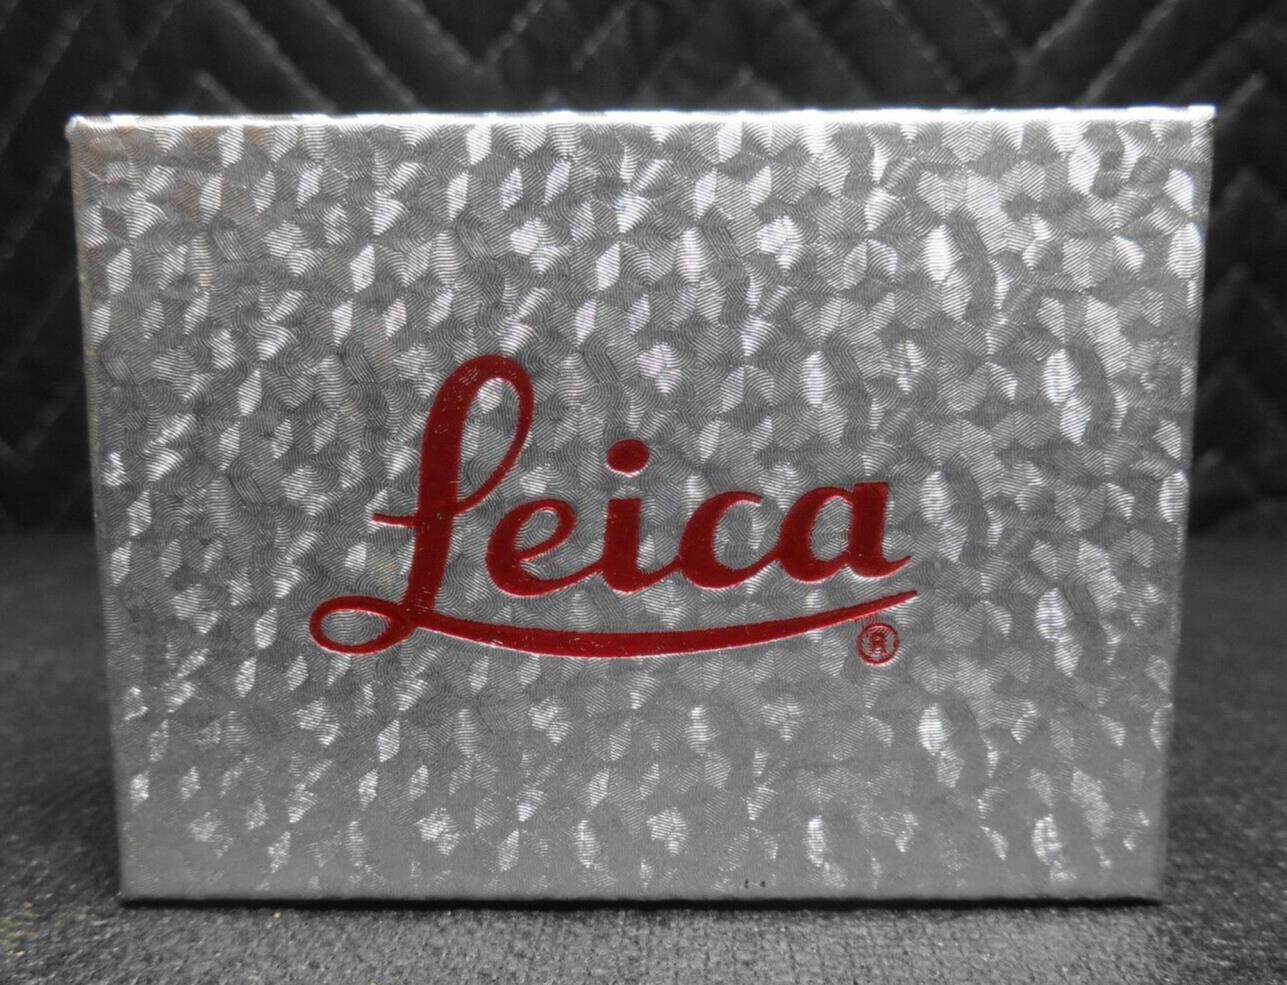 Vintage 1980's LEICA CAMERA Brass Belt Buckle for up to 1.25" Inch Belt w/ Box